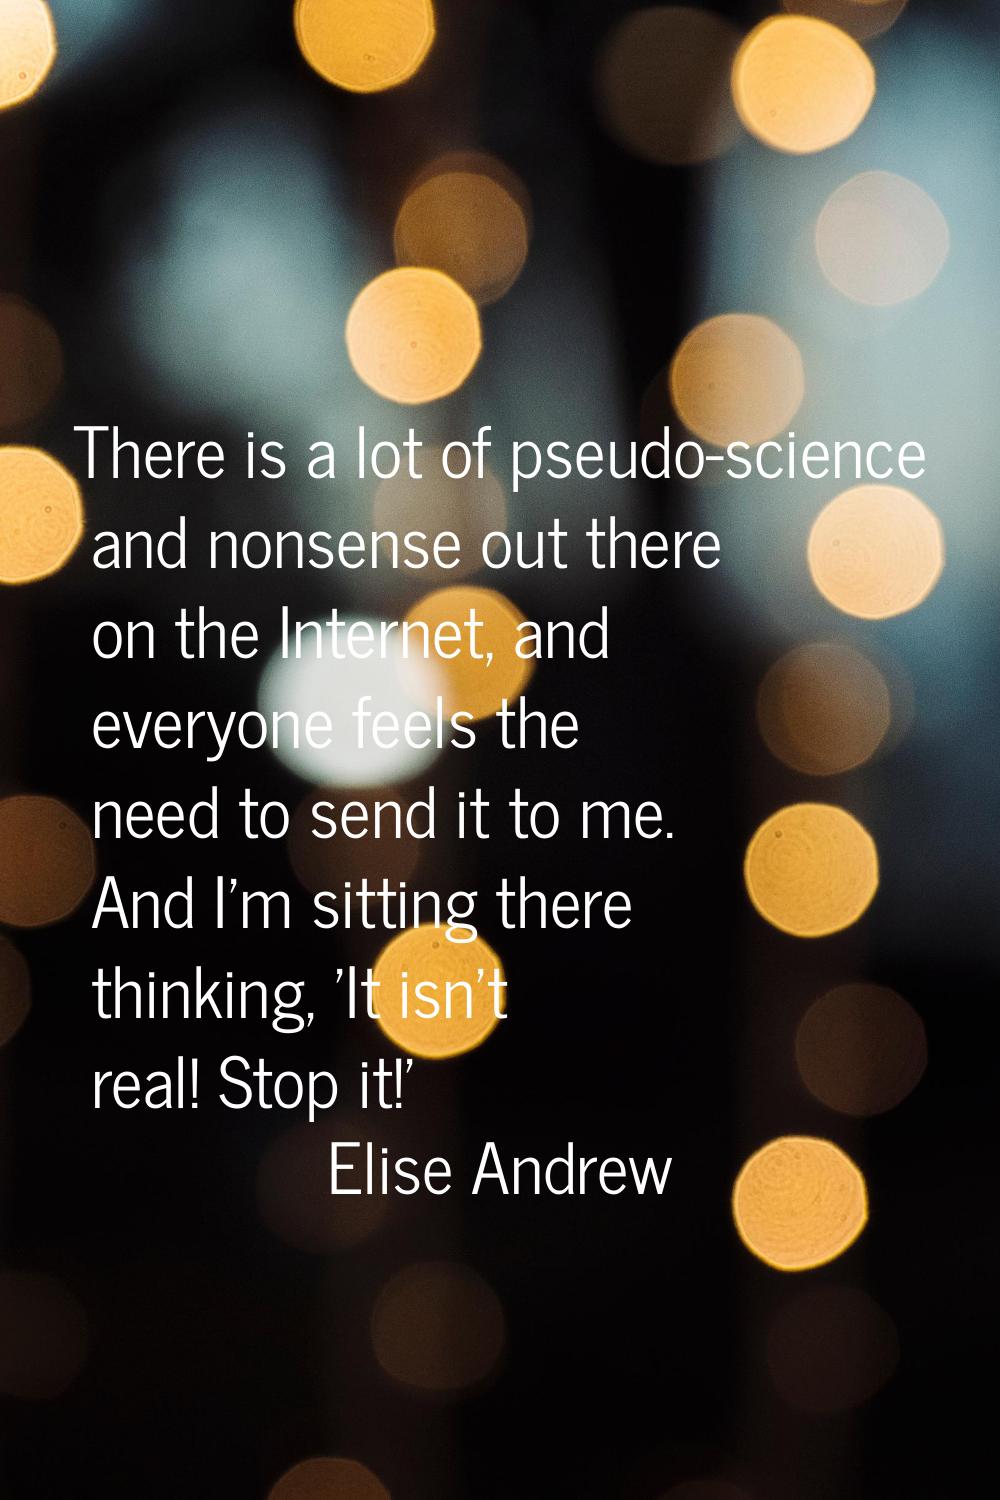 There is a lot of pseudo-science and nonsense out there on the Internet, and everyone feels the nee